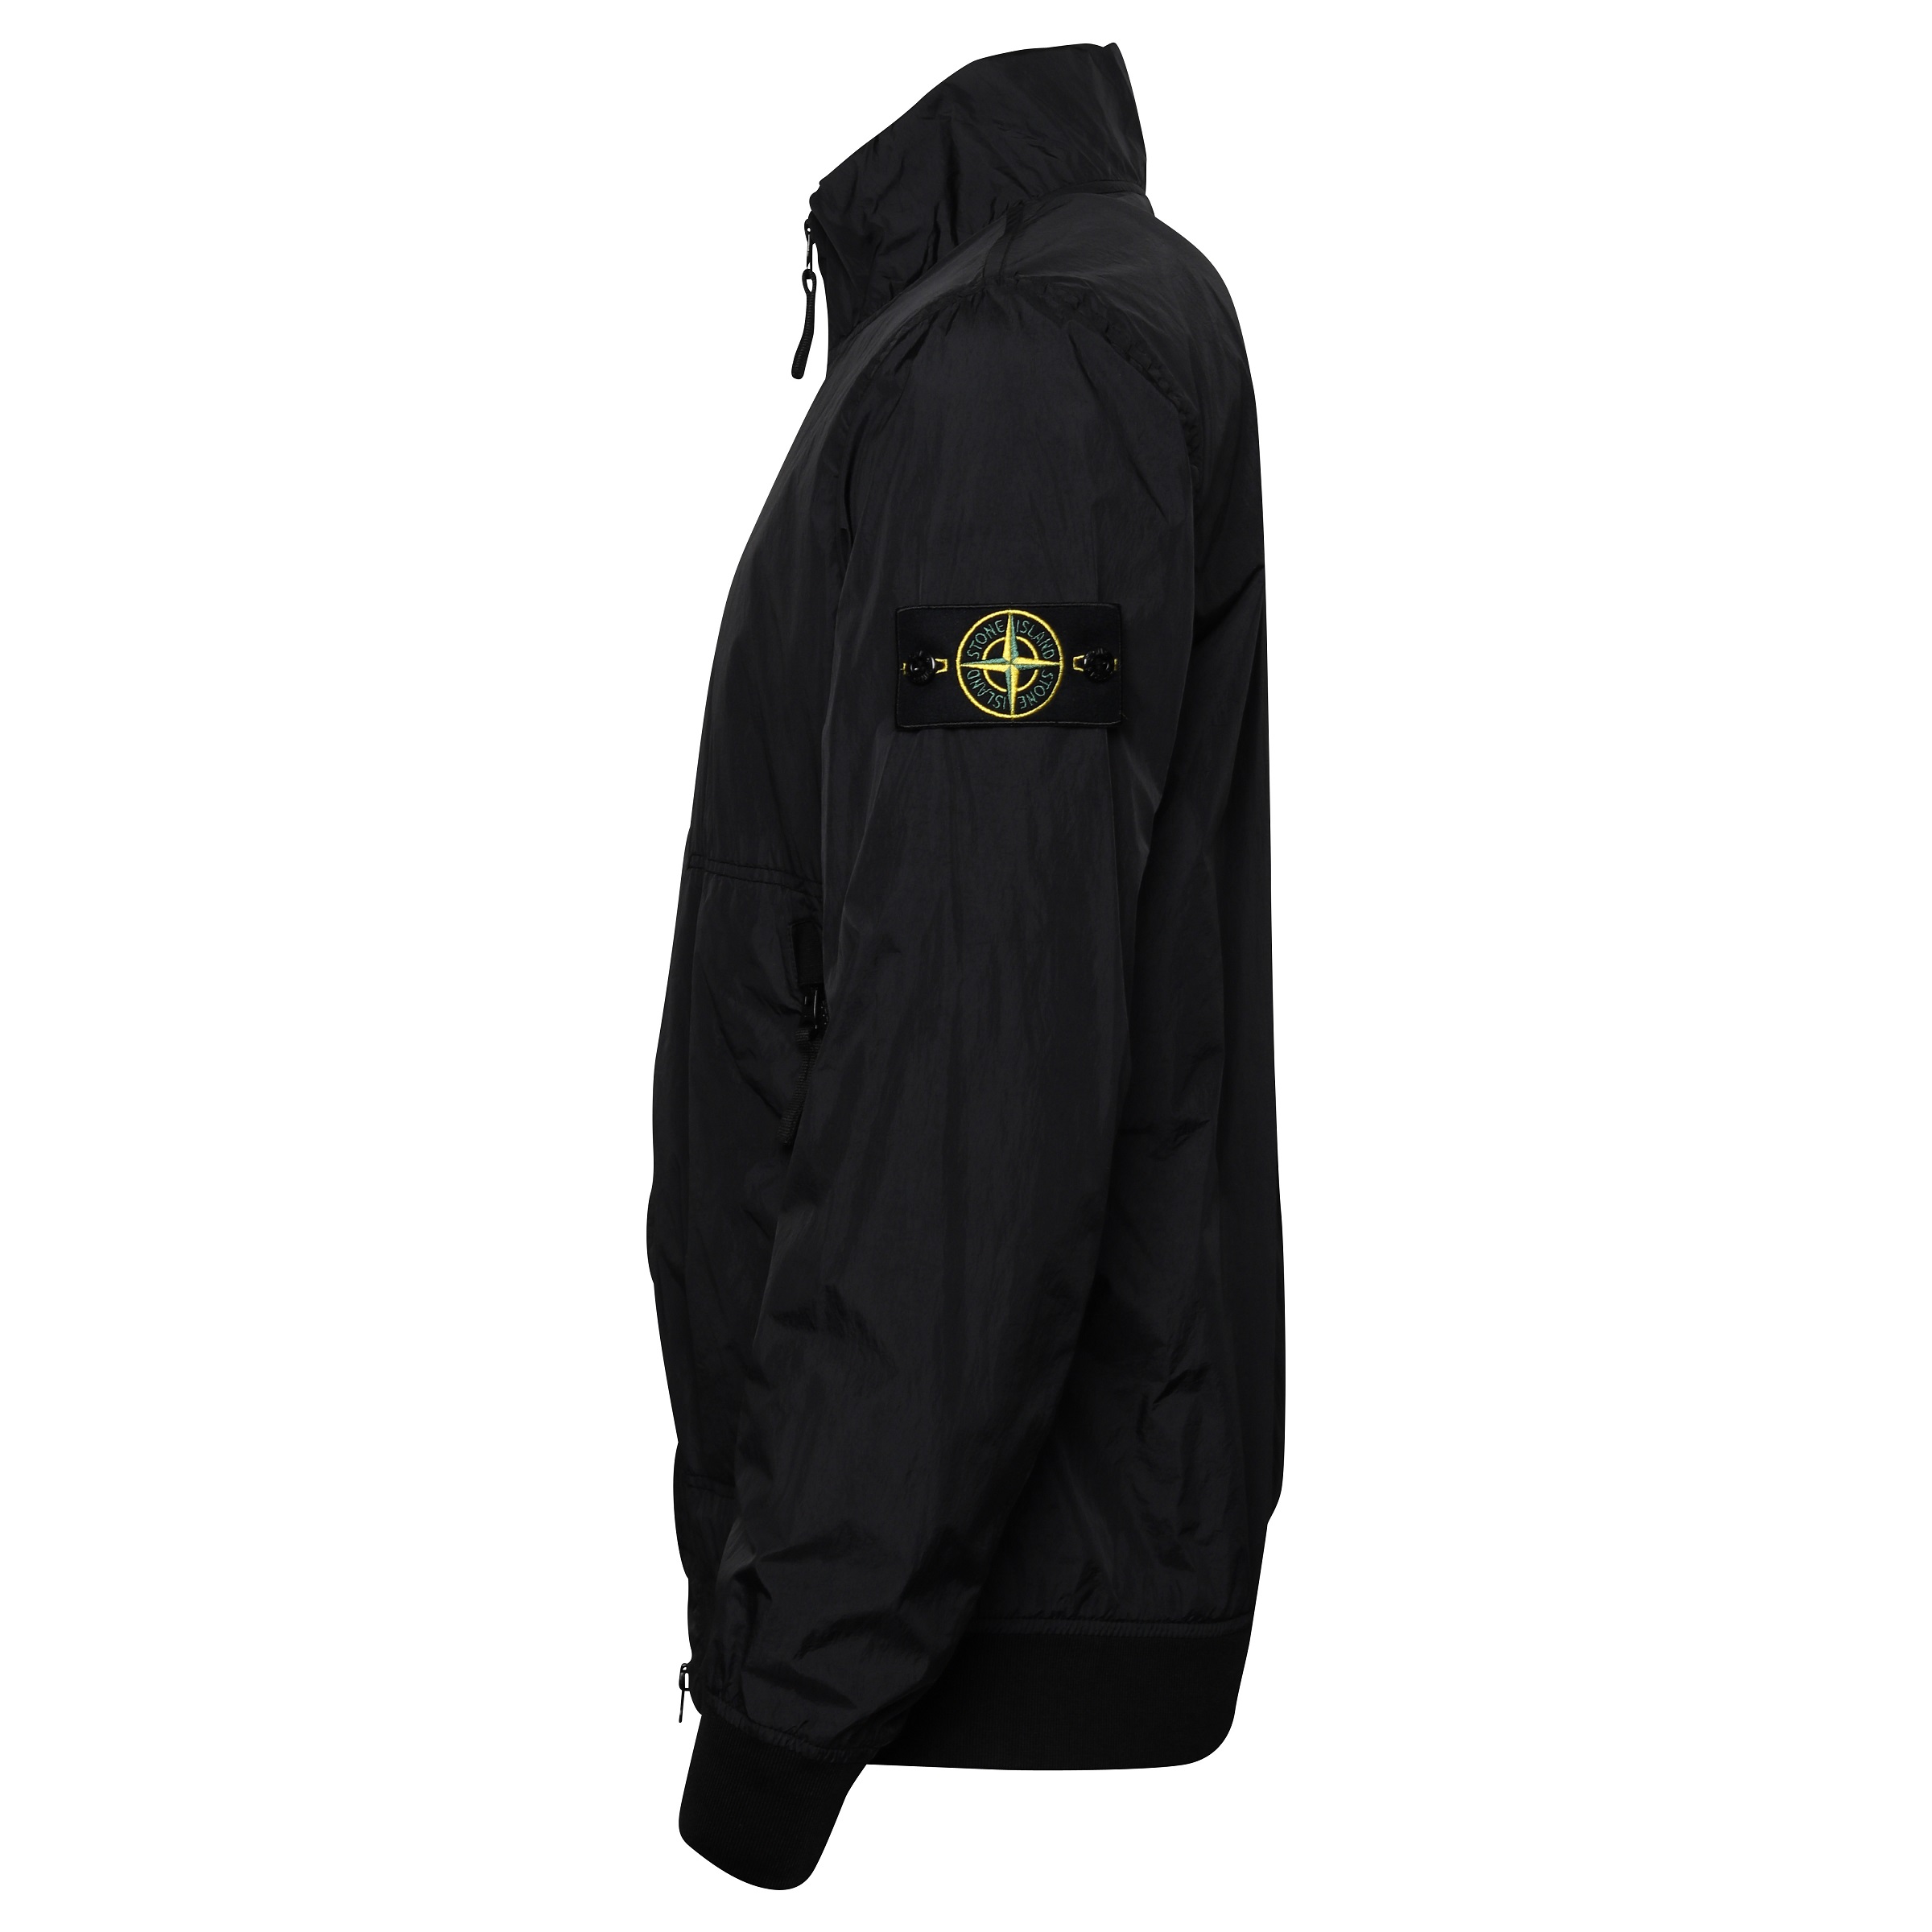 Stone Island Garment Dyed Crinkle Reps Light Jacket in Black 2XL